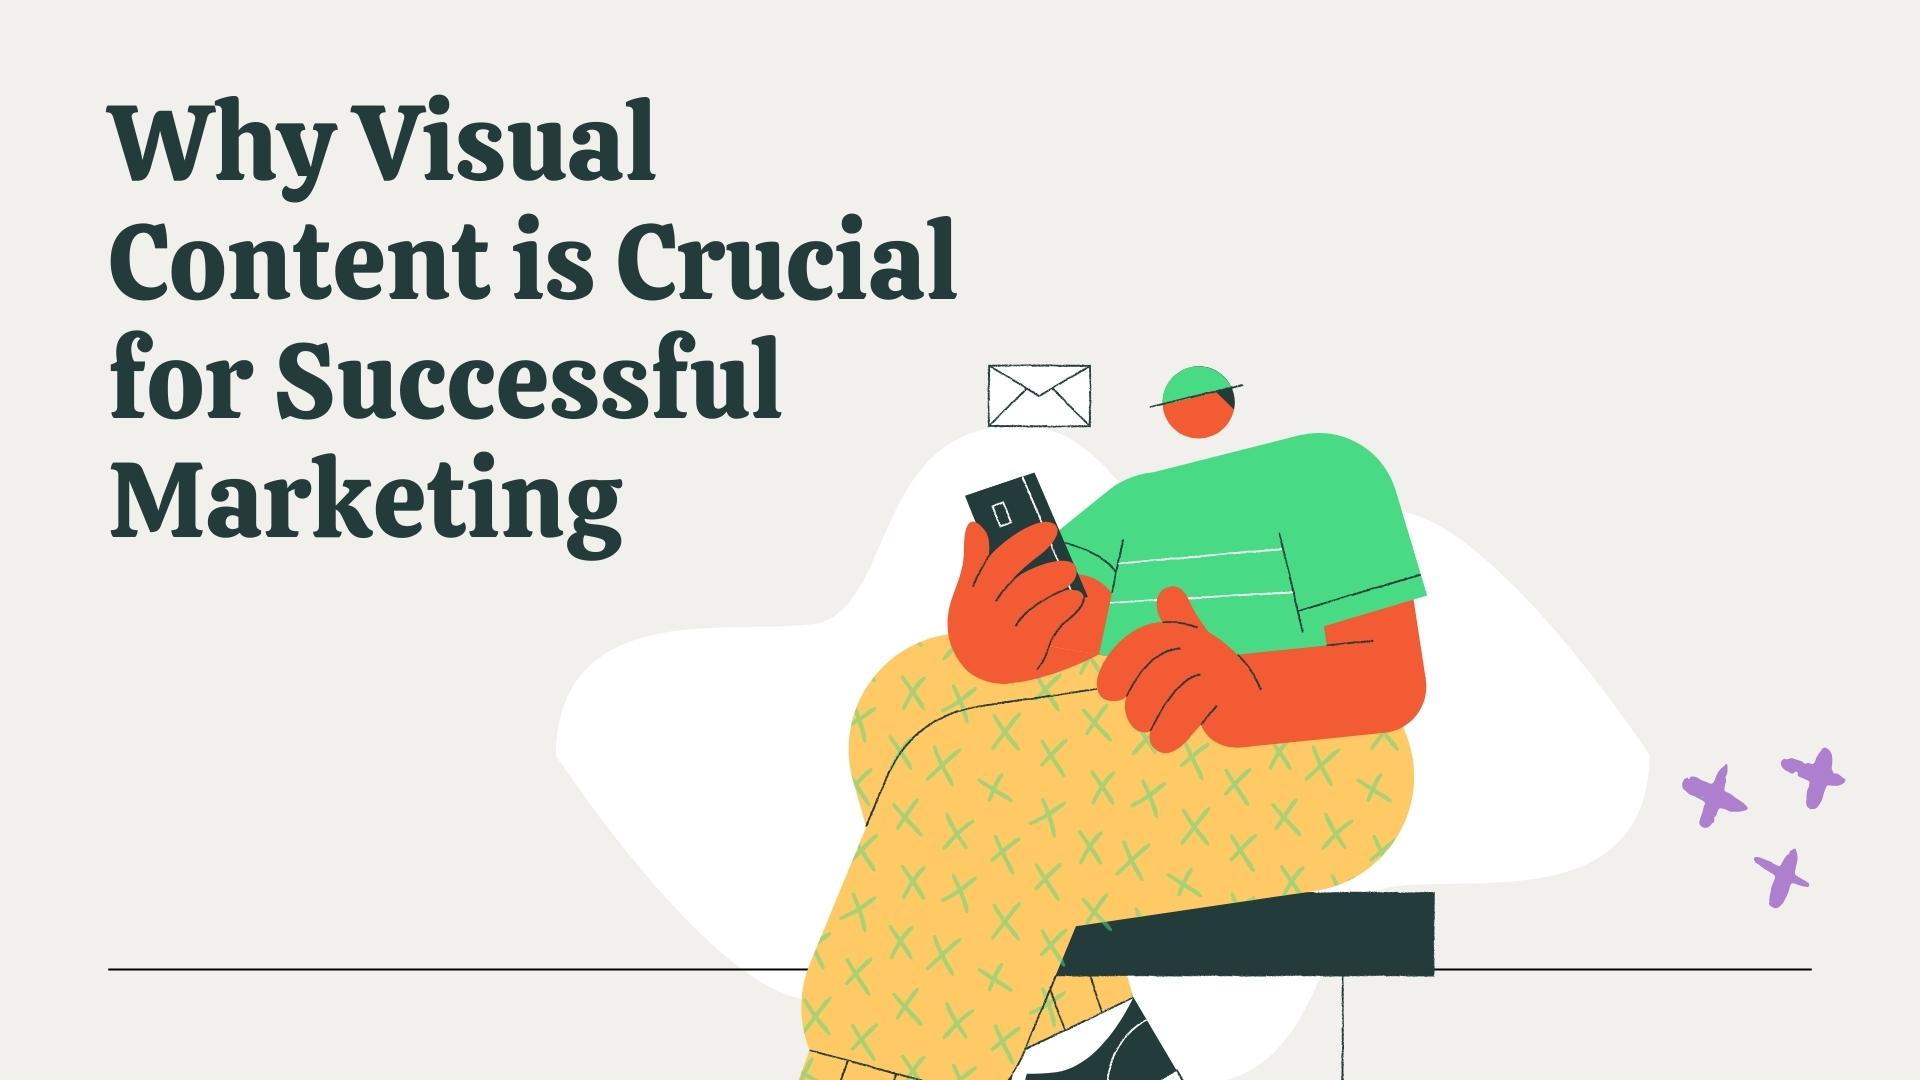 Why visual content is crucial for successful marketing [Complete guide]